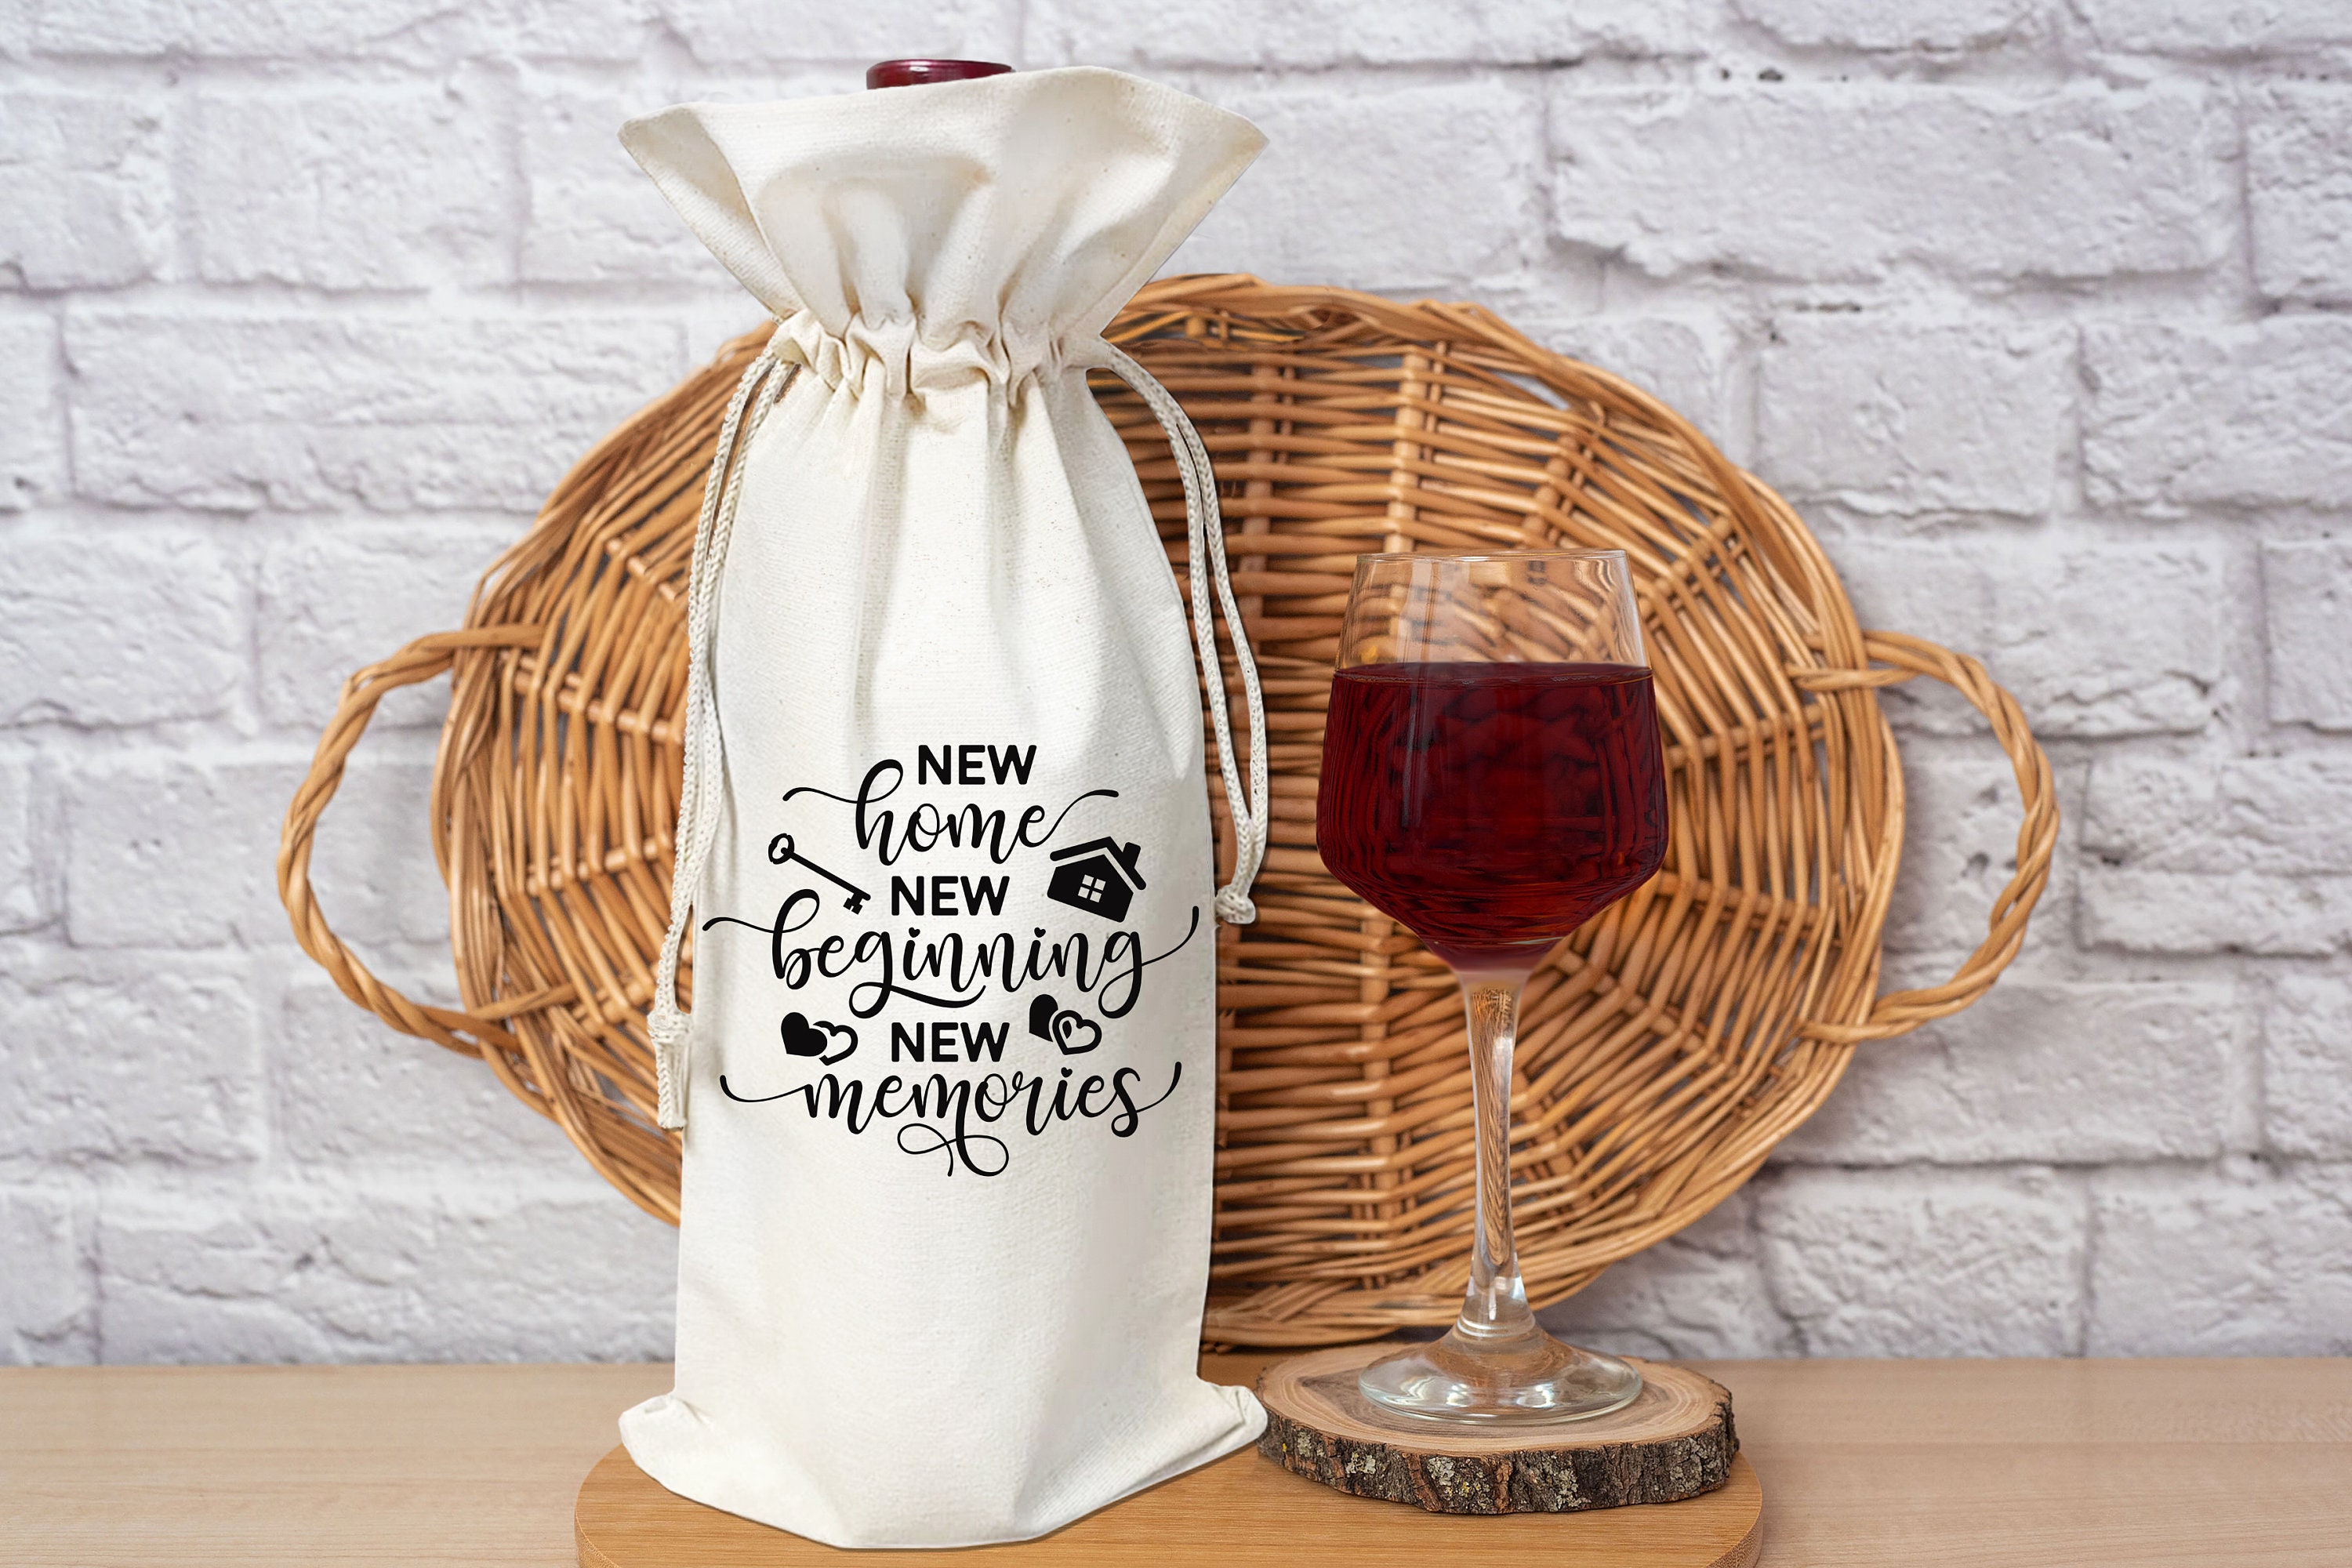 Welcome Home Wine Gift Bags – Real Estate Supply Store